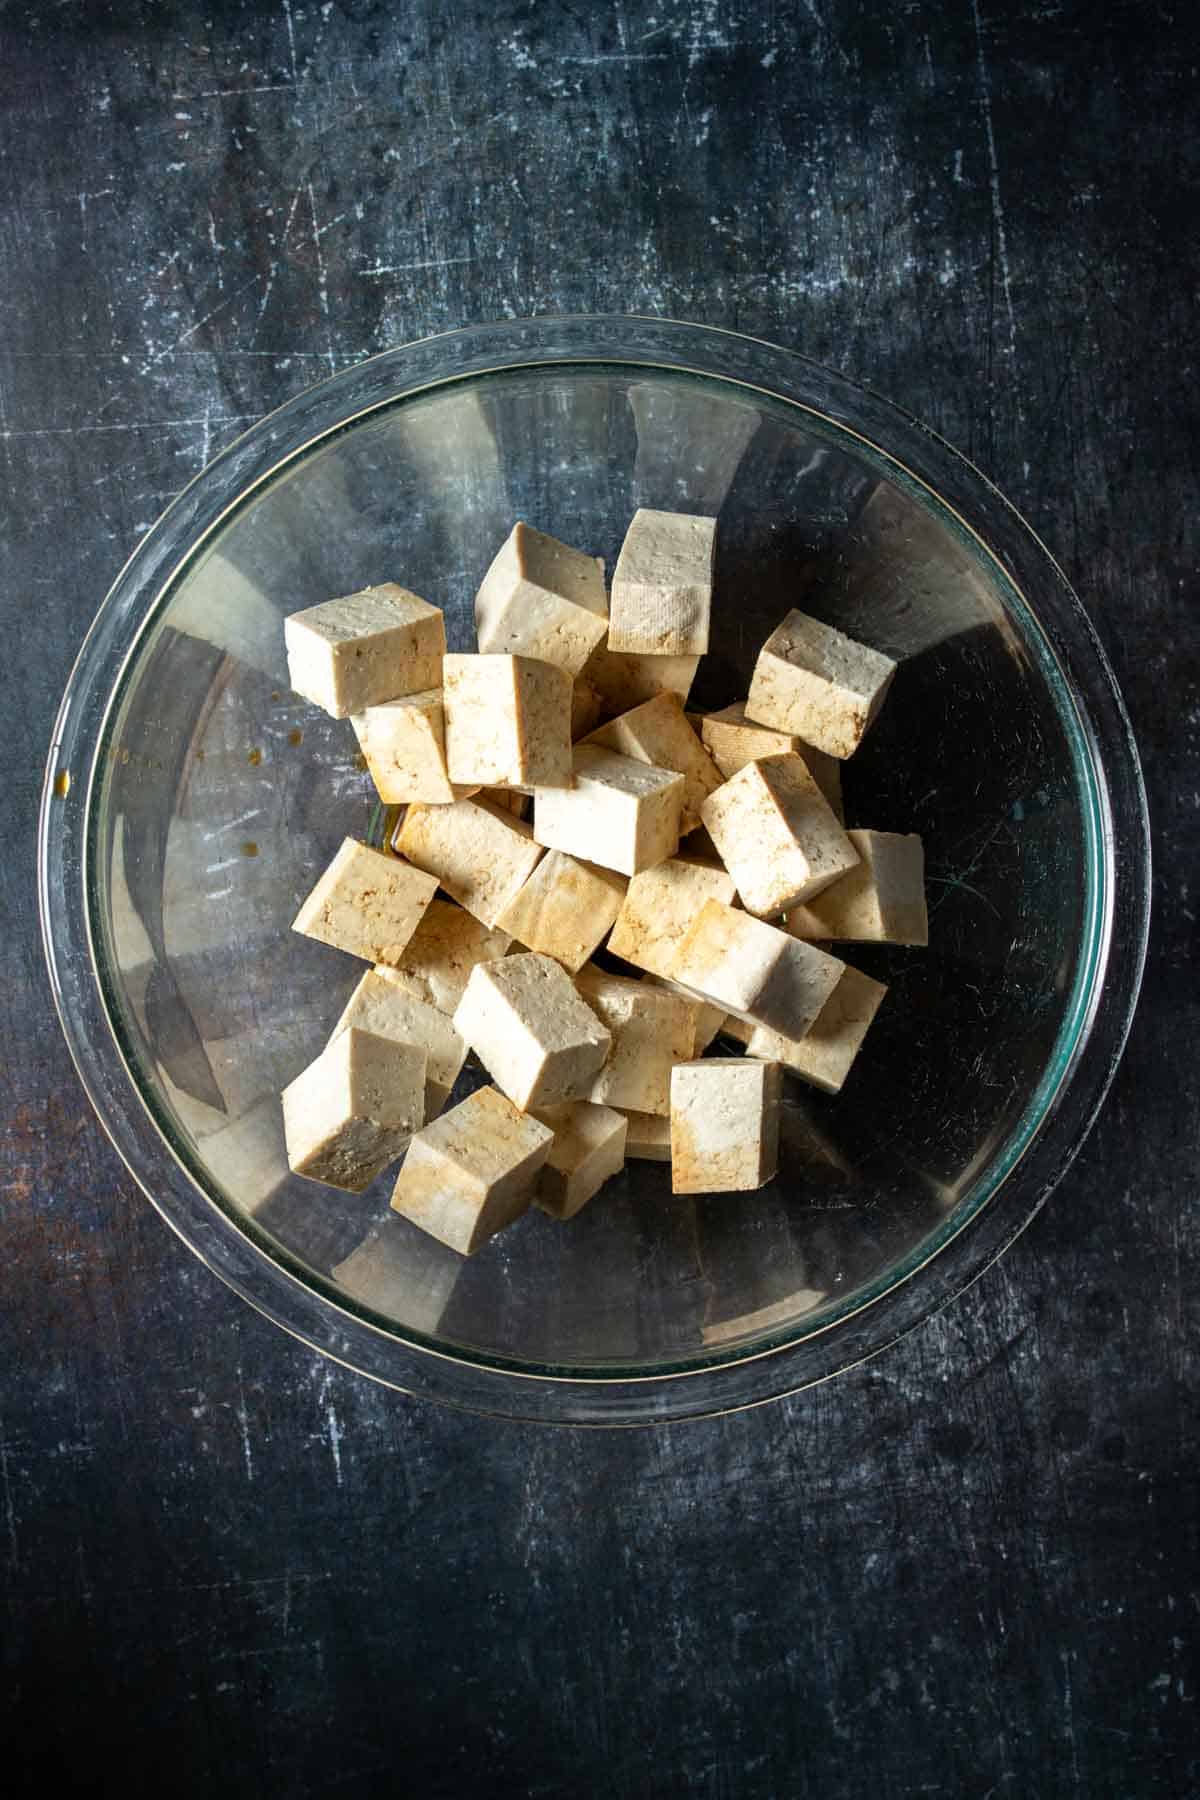 Top view of a glass bowl with pieces of tofu inside on a dark surface.